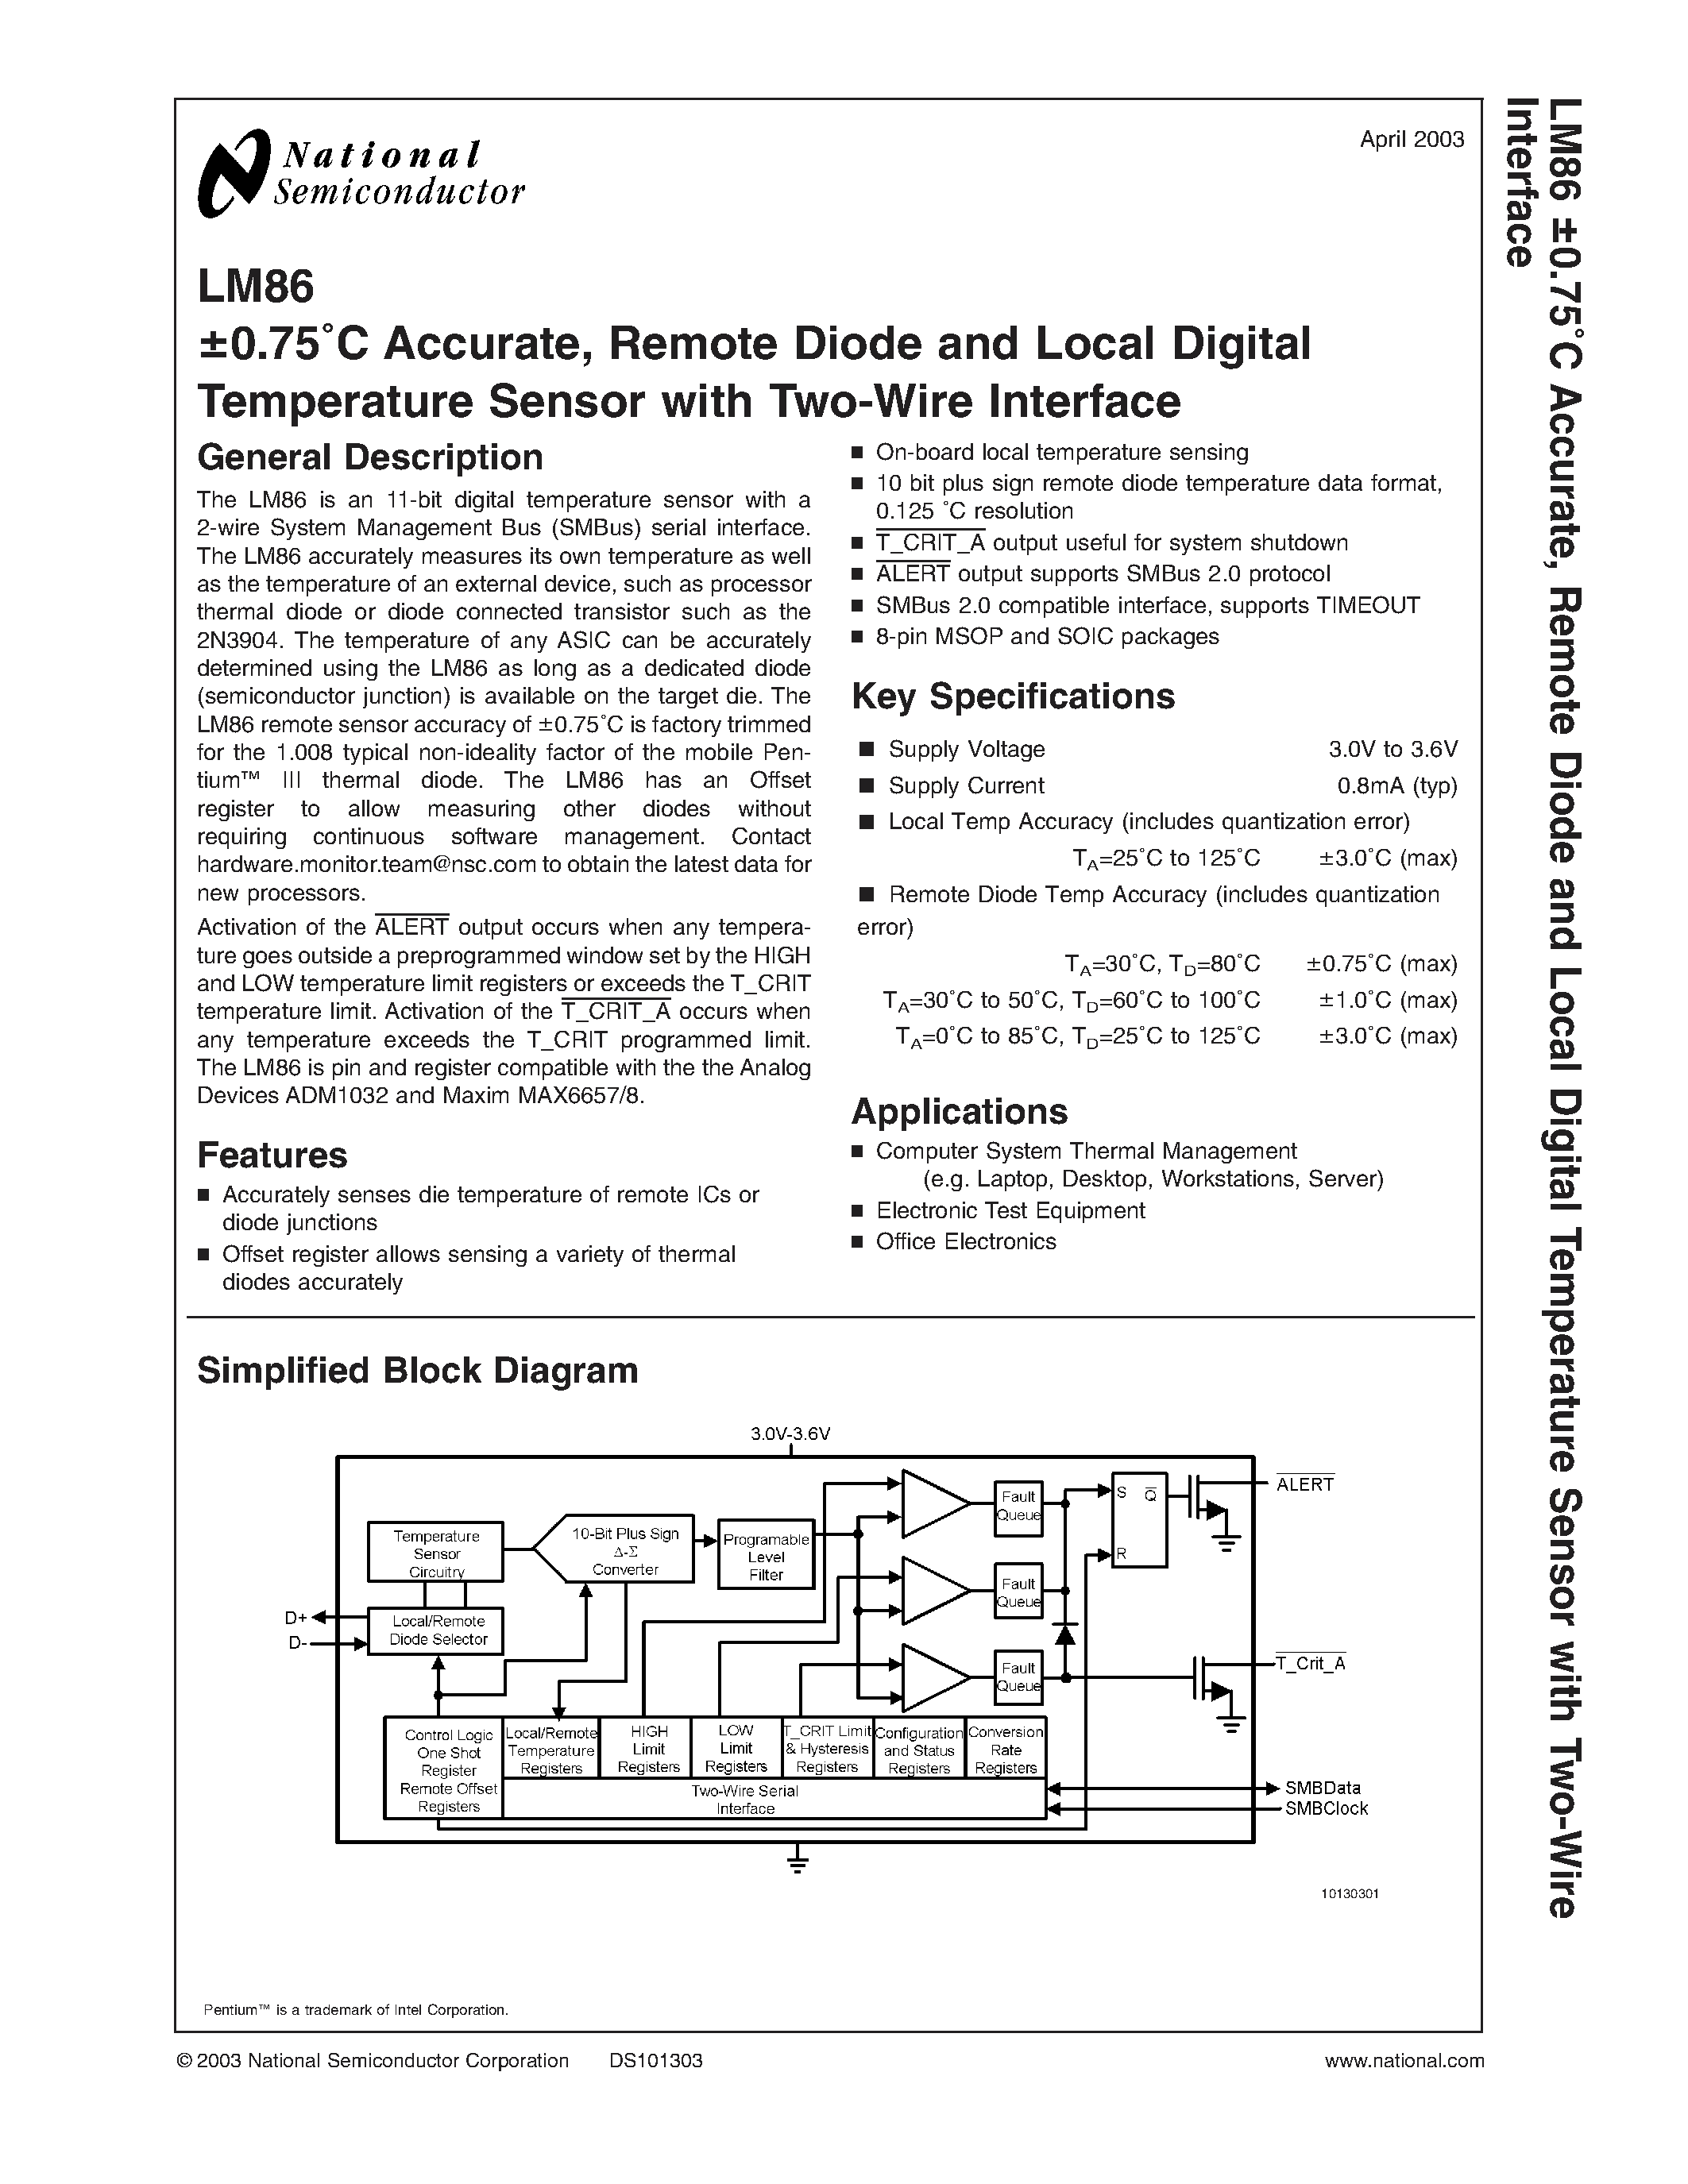 Datasheet LM86 - 0.75C Accurate / Remote Diode and Local Digital Temperature Sensor with Two-Wire Interface page 1